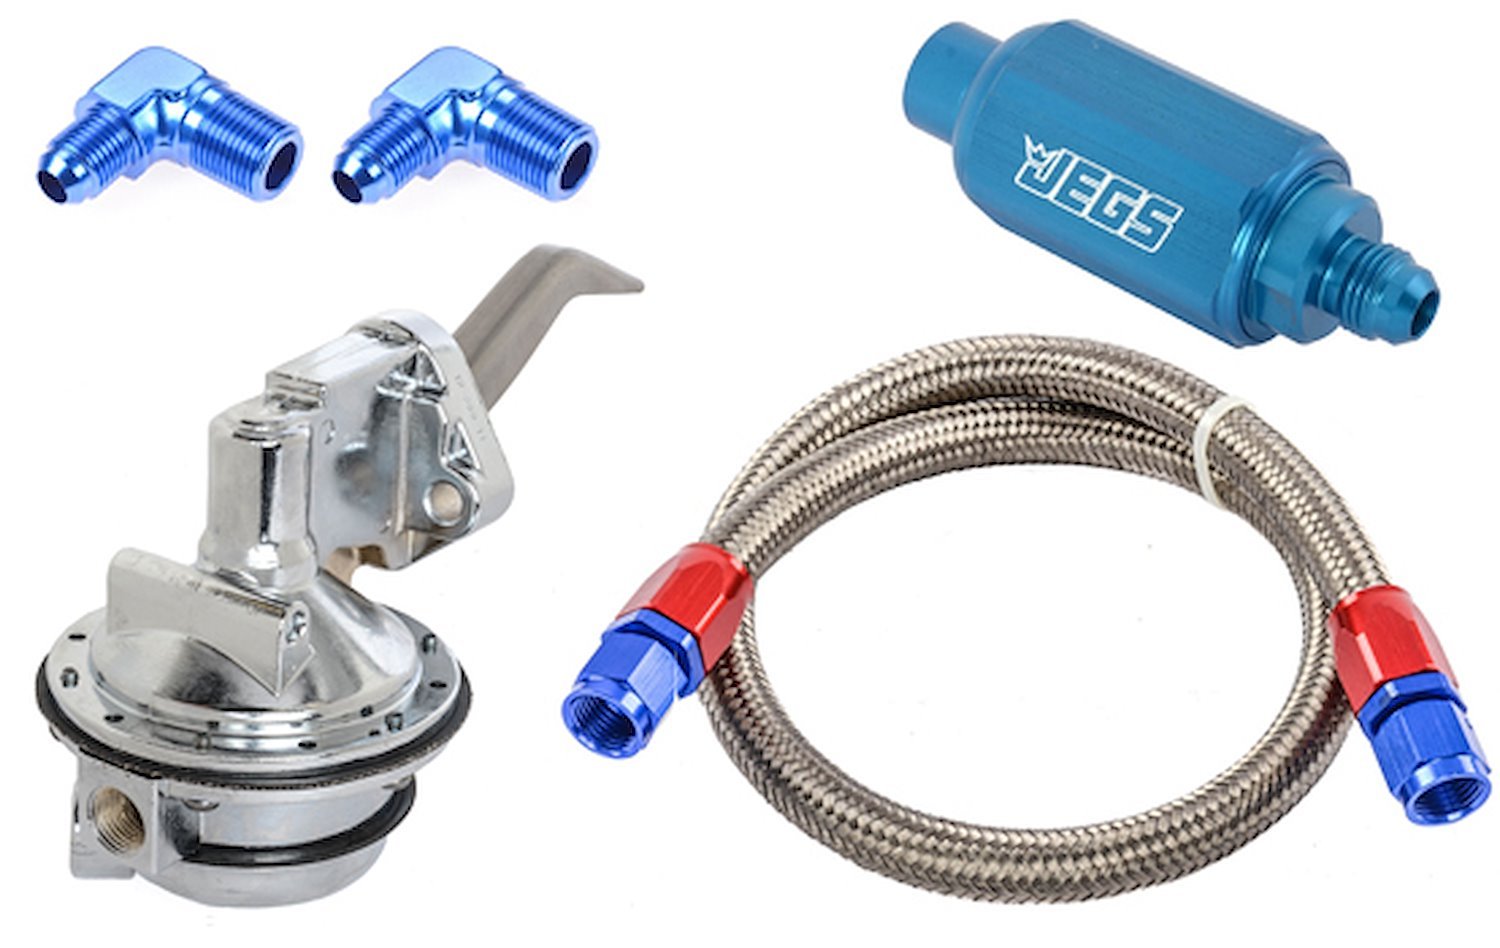 Mechanical Fuel Pump & Installation Kit for Ford 289-302-351W [110 gph, Blue Fittings]